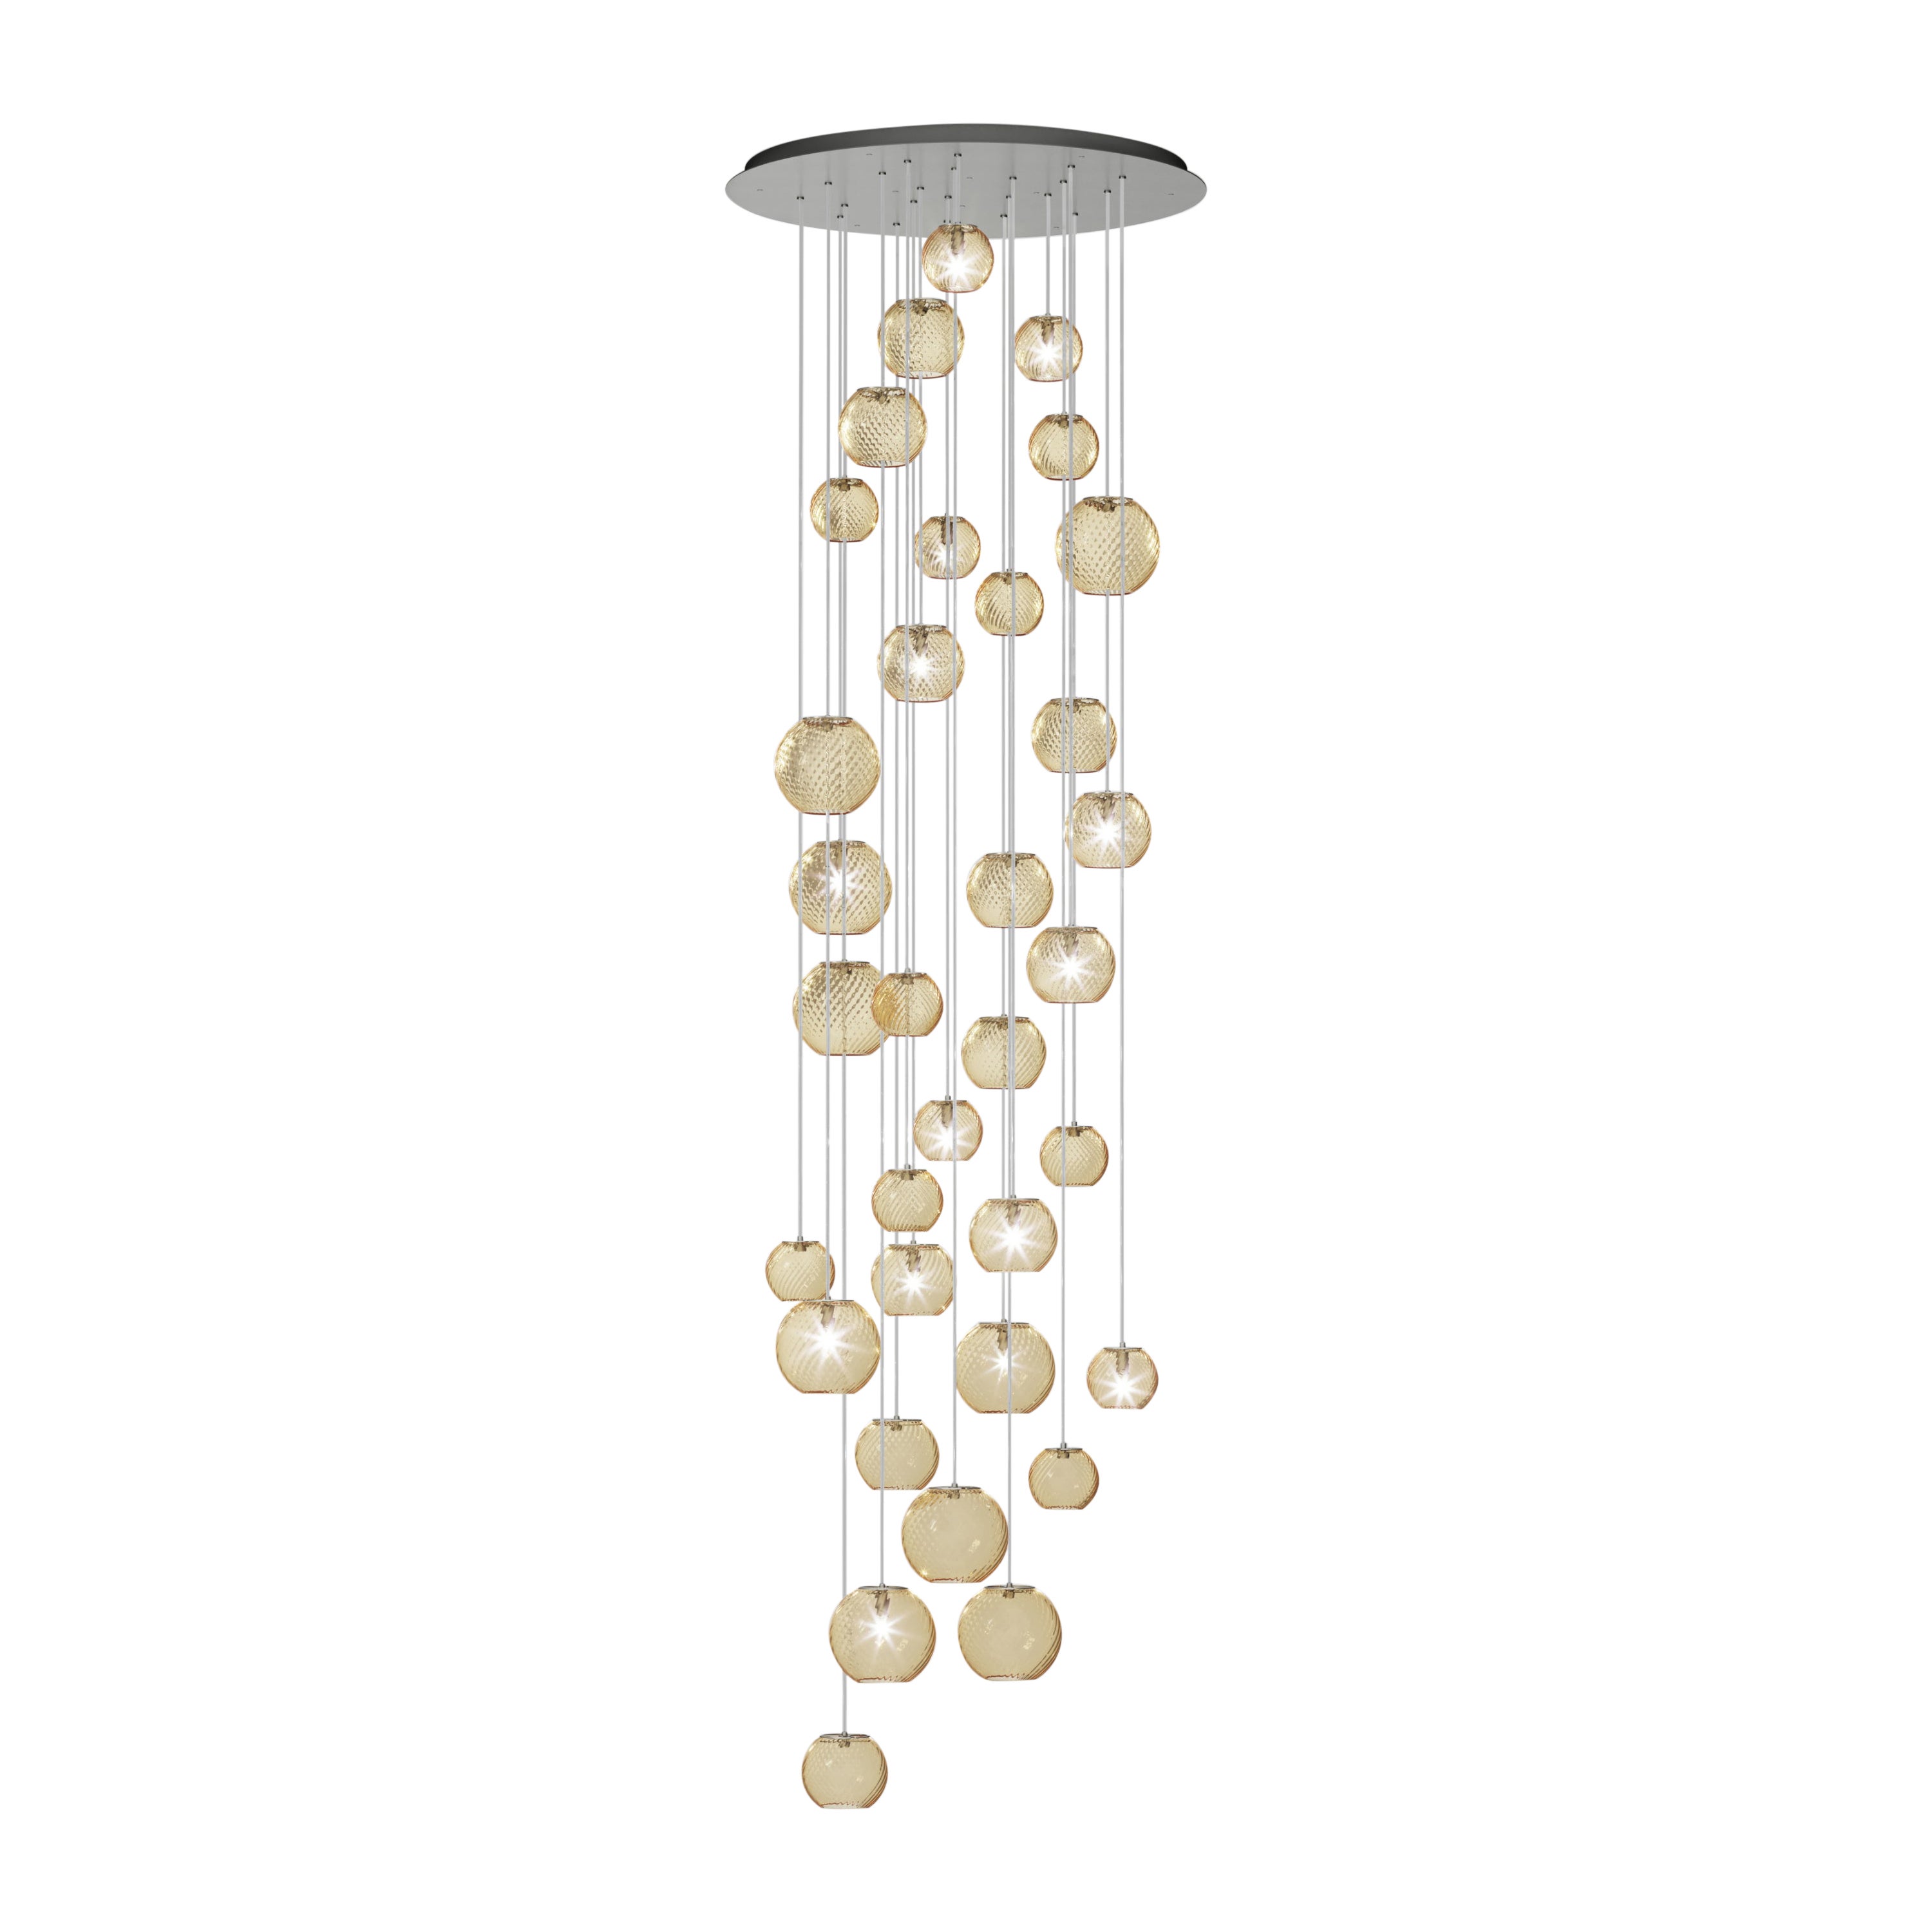 Vistosi Pendant Light in Amber Striped Glass And Satin Nickel Frame For Sale